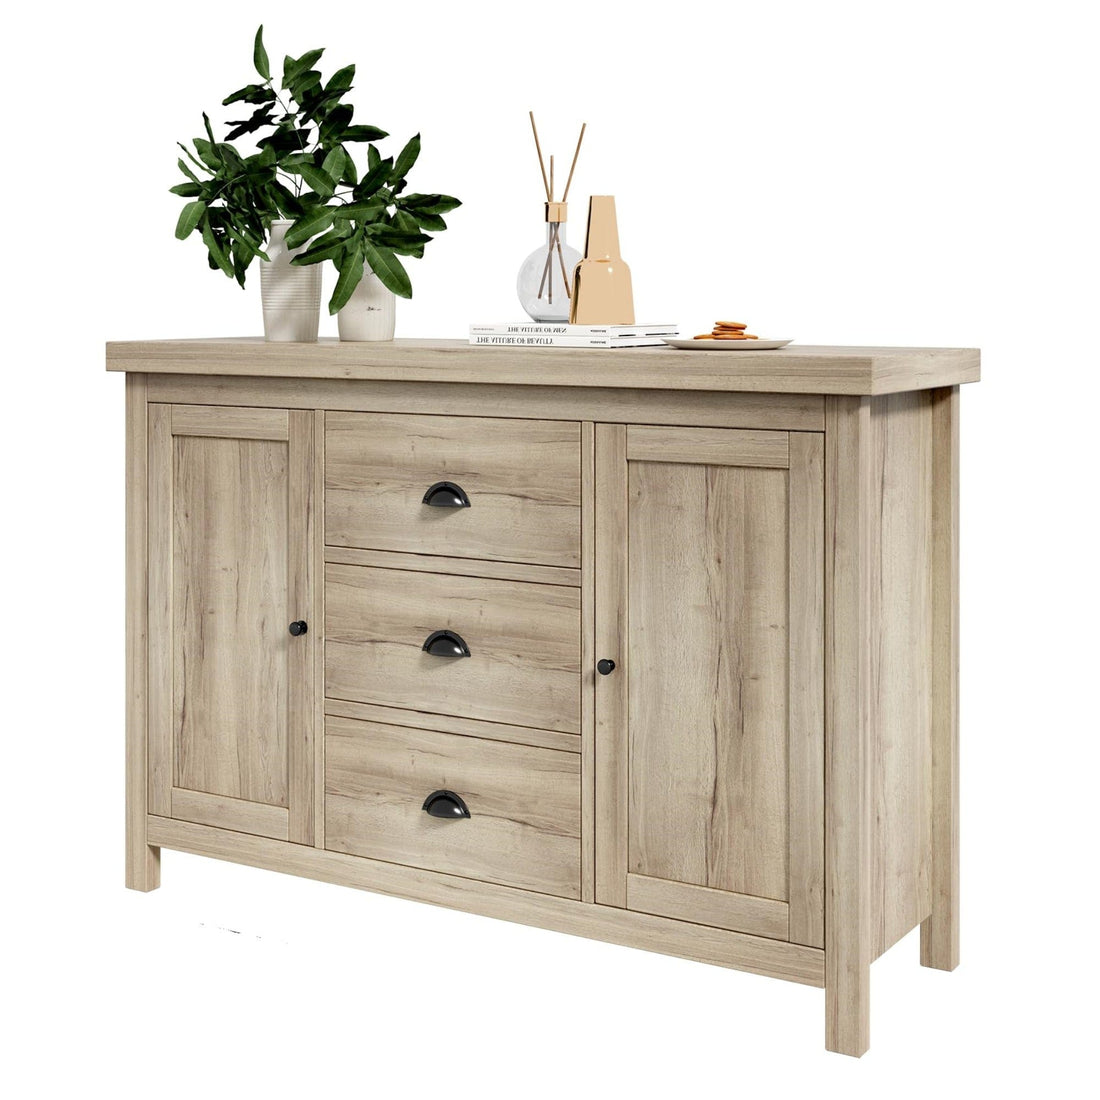 Oak Buffet Sideboard with 3 Drawers, 2 Doors for Kitchen Storage